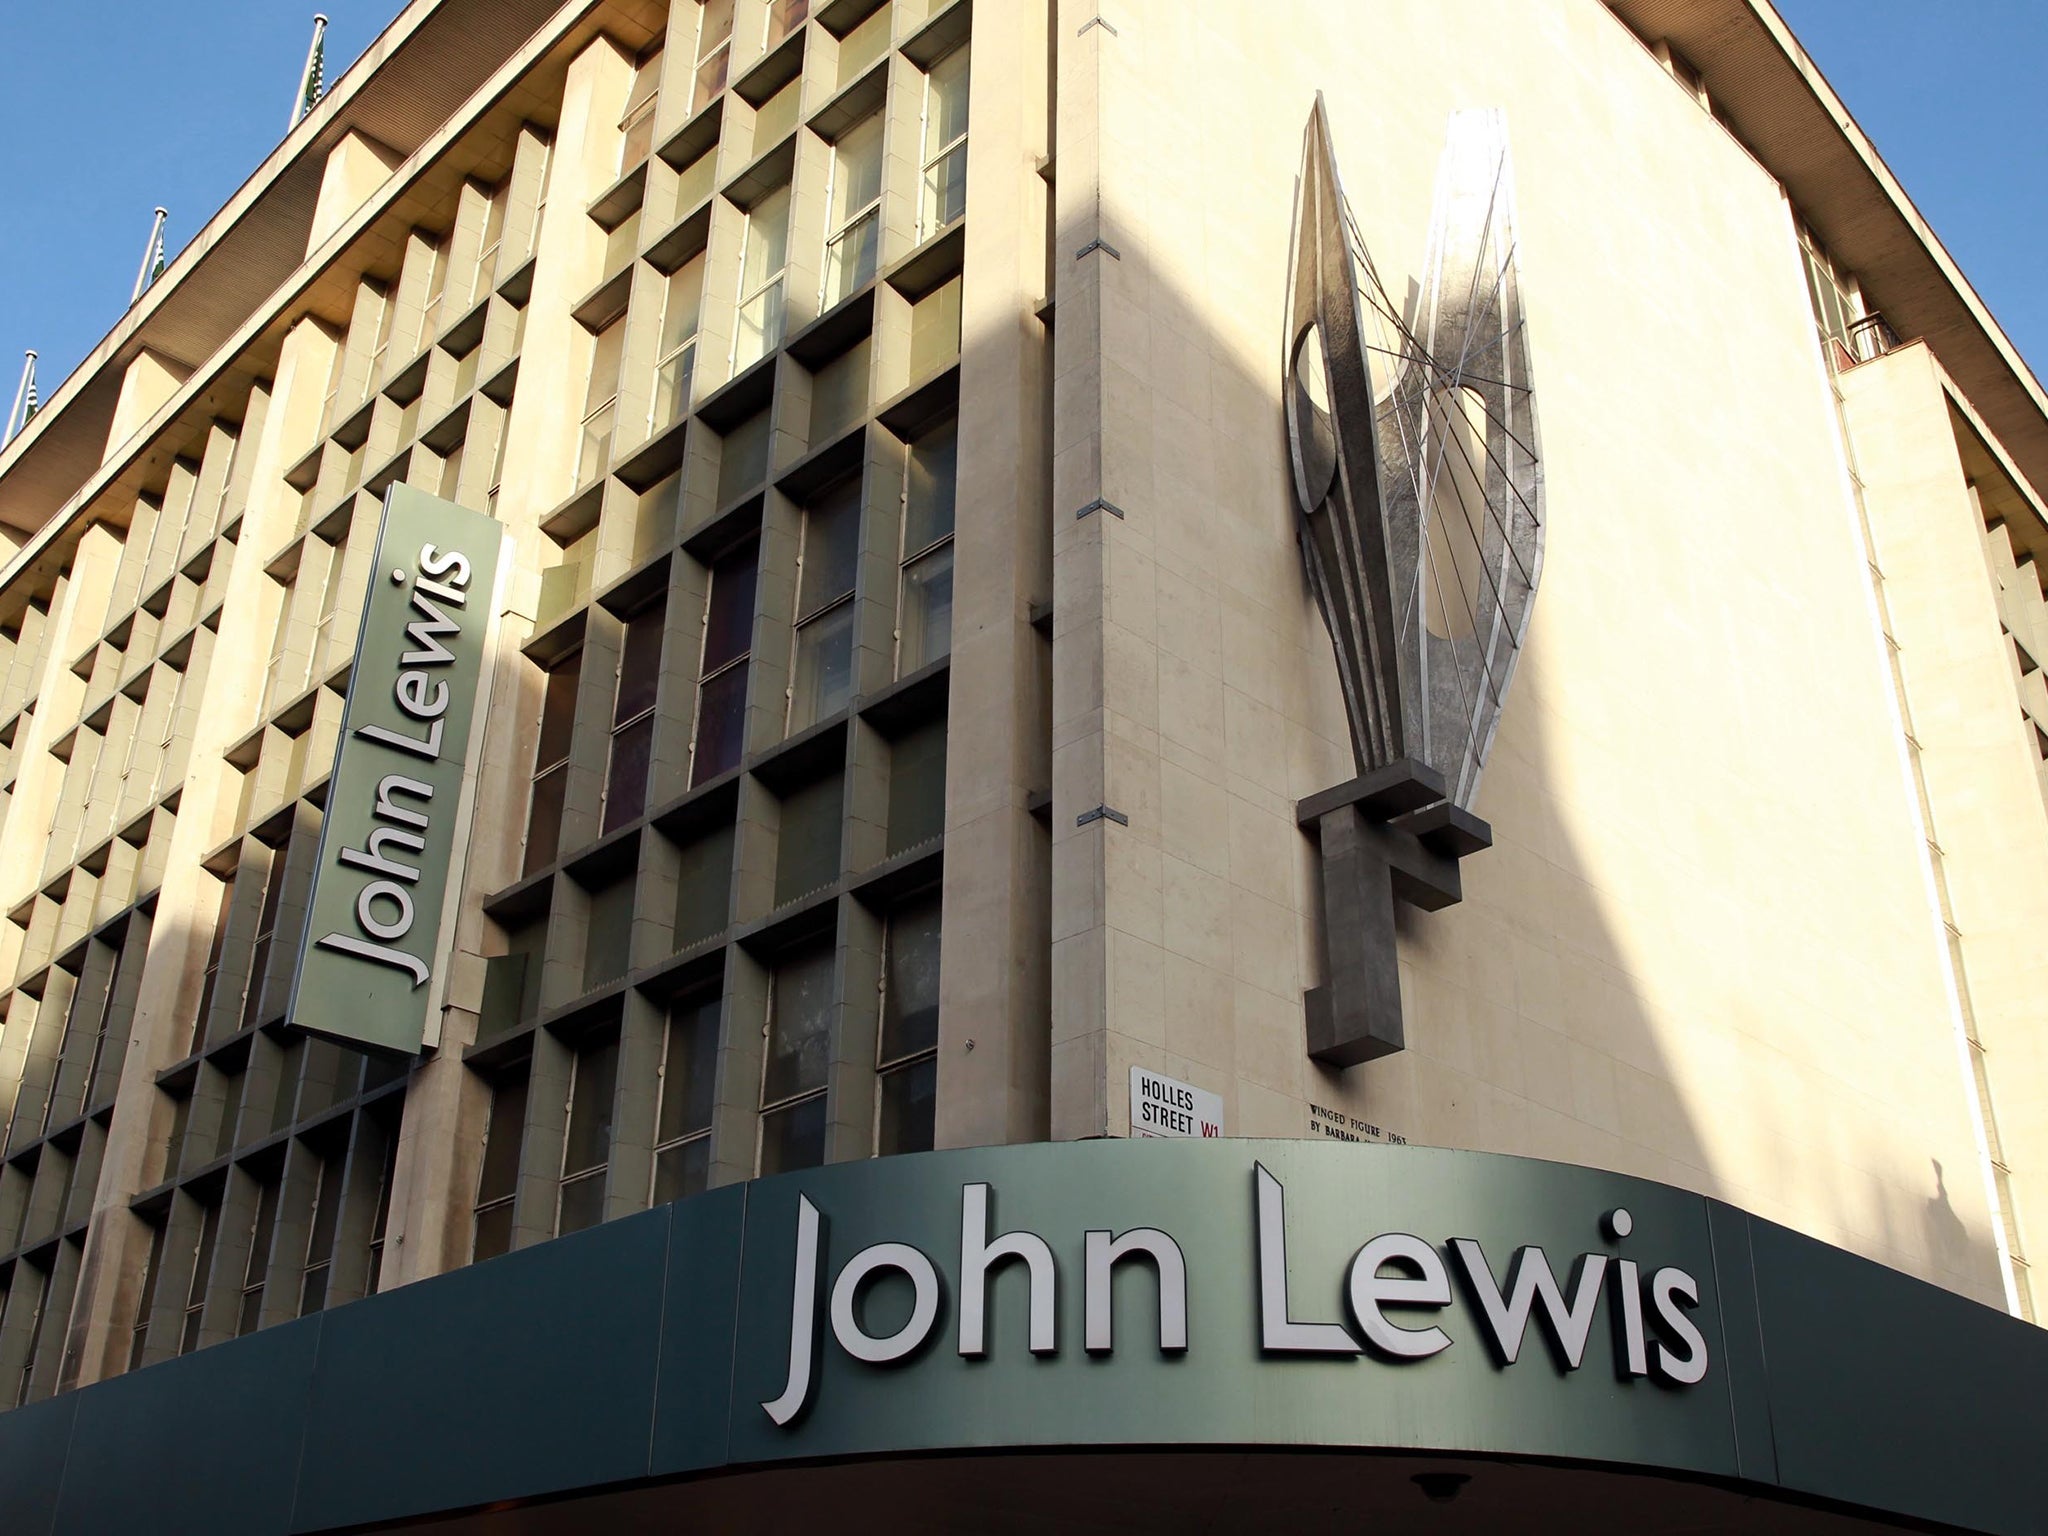 Prices in Scottish branches of John Lewis are likely to be higher than in the rest of the UK